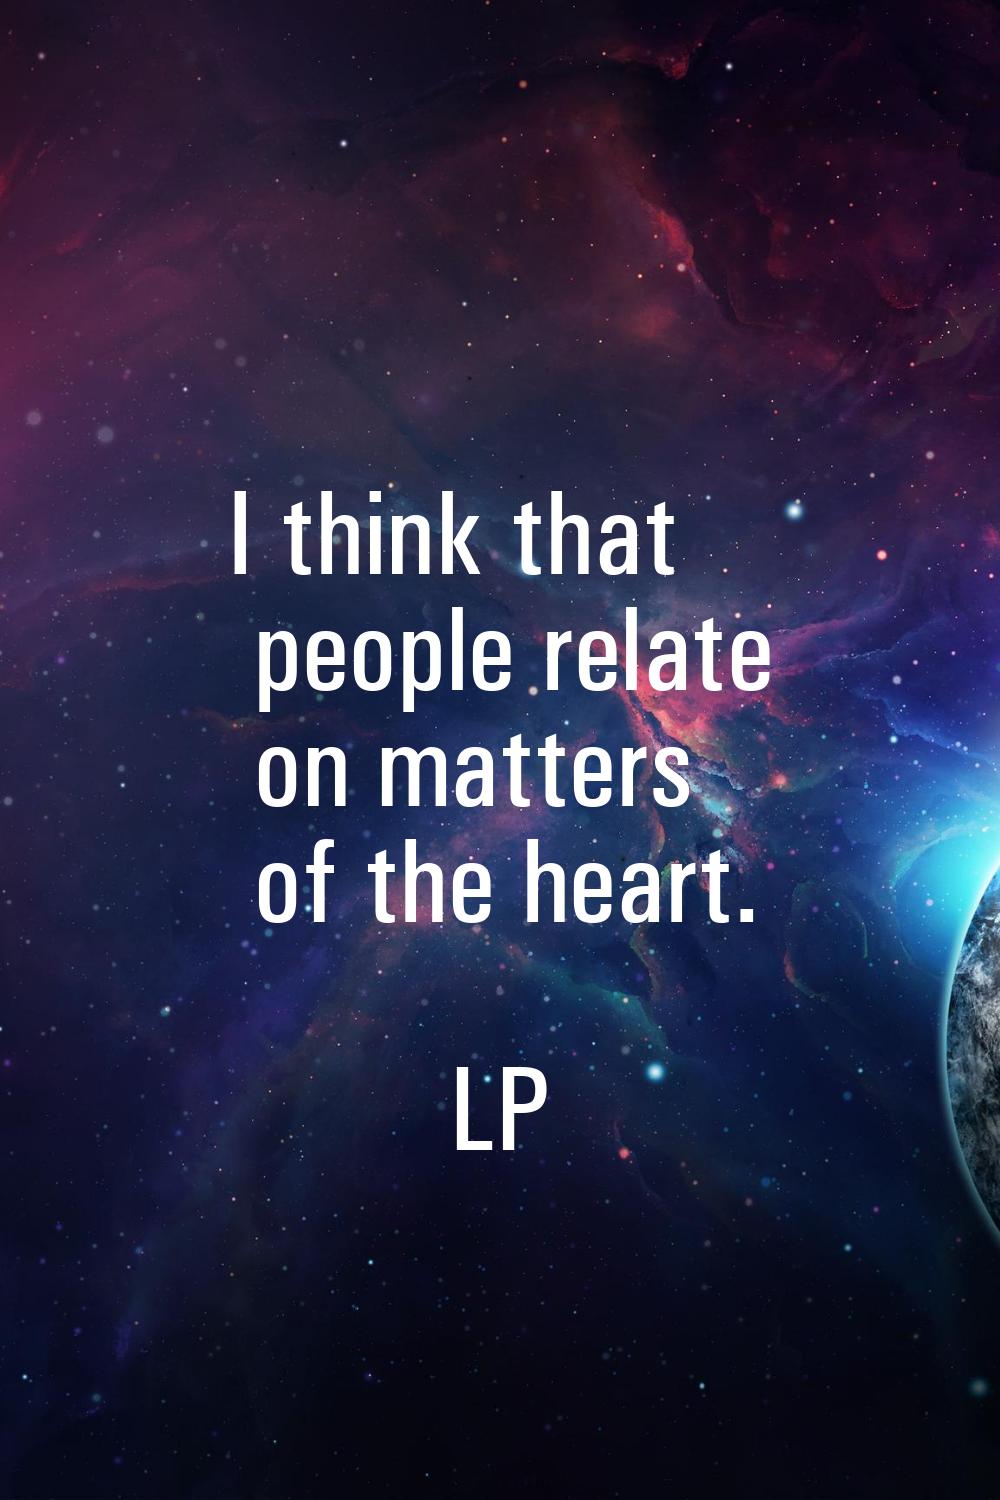 I think that people relate on matters of the heart.